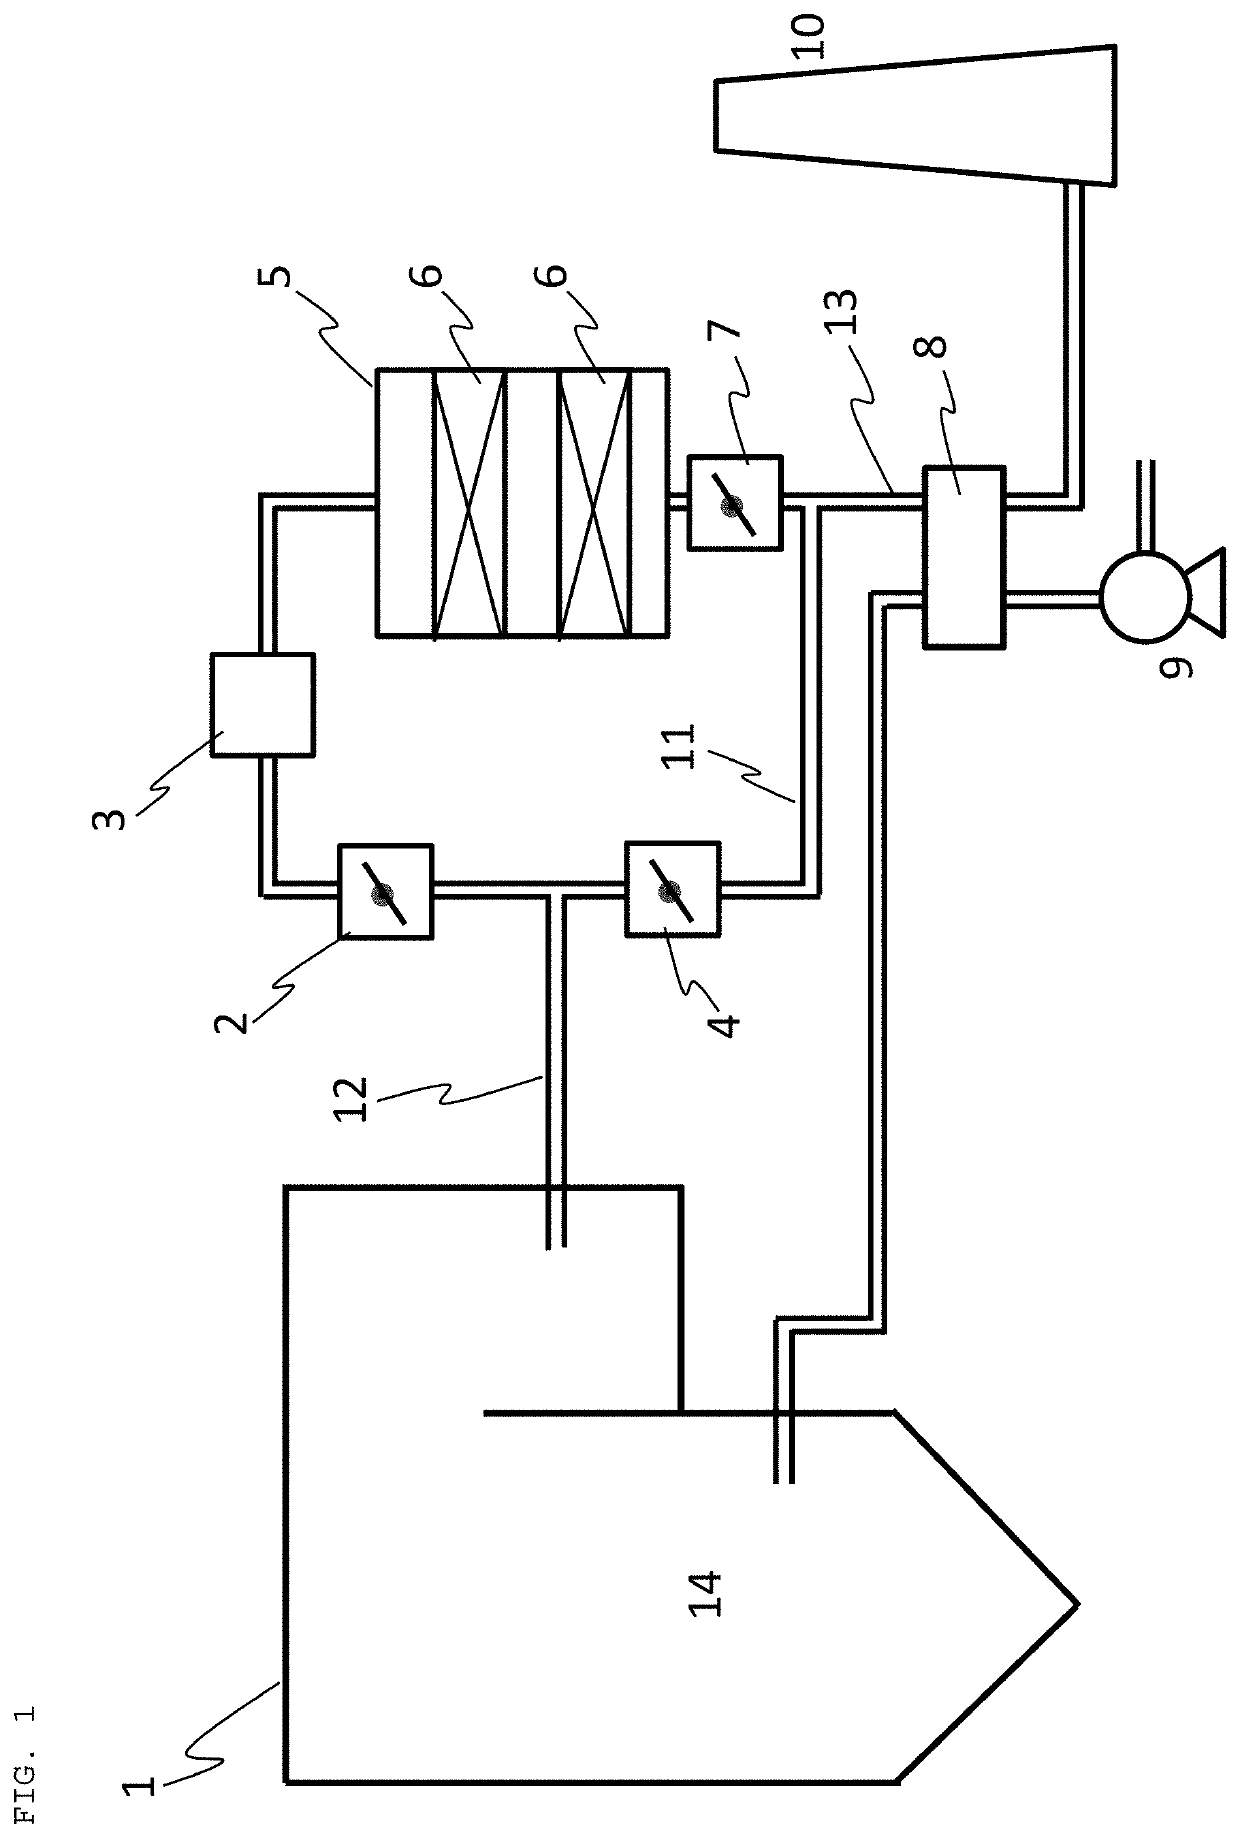 Method for operating flue gas purification system